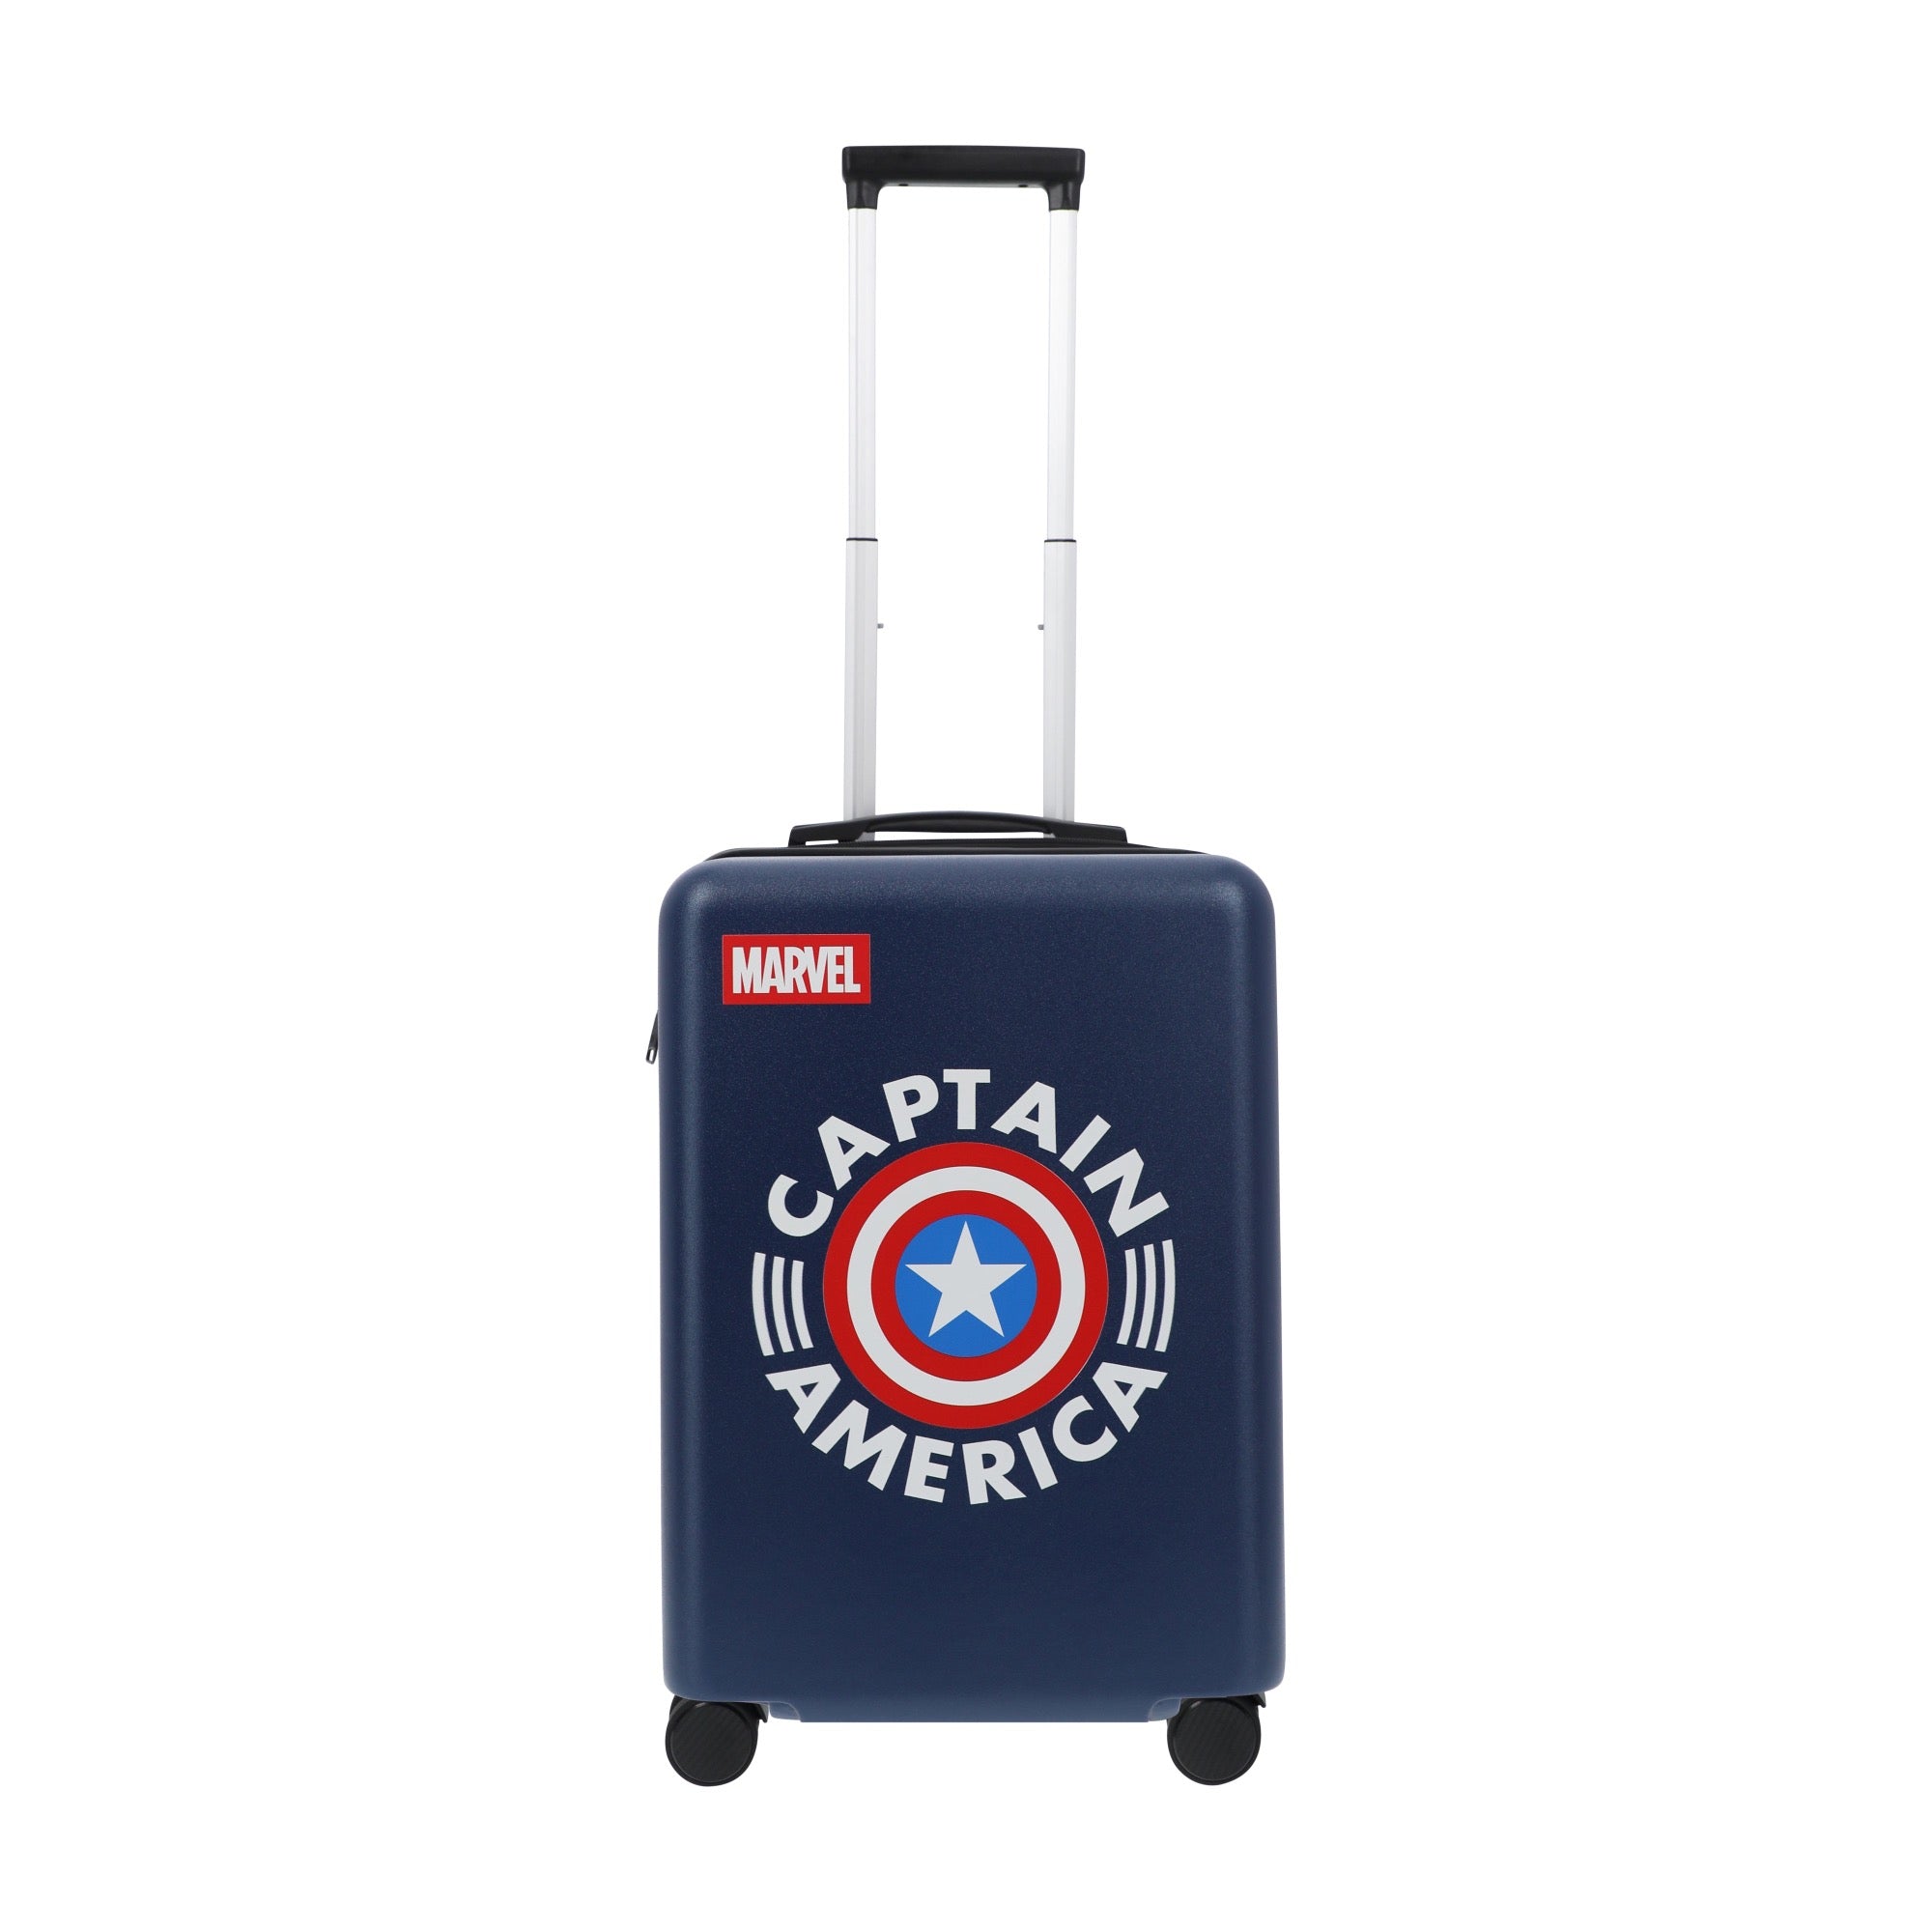 Navy blue marvel captain america 22.5" carry-on spinner suitcase luggage by Ful